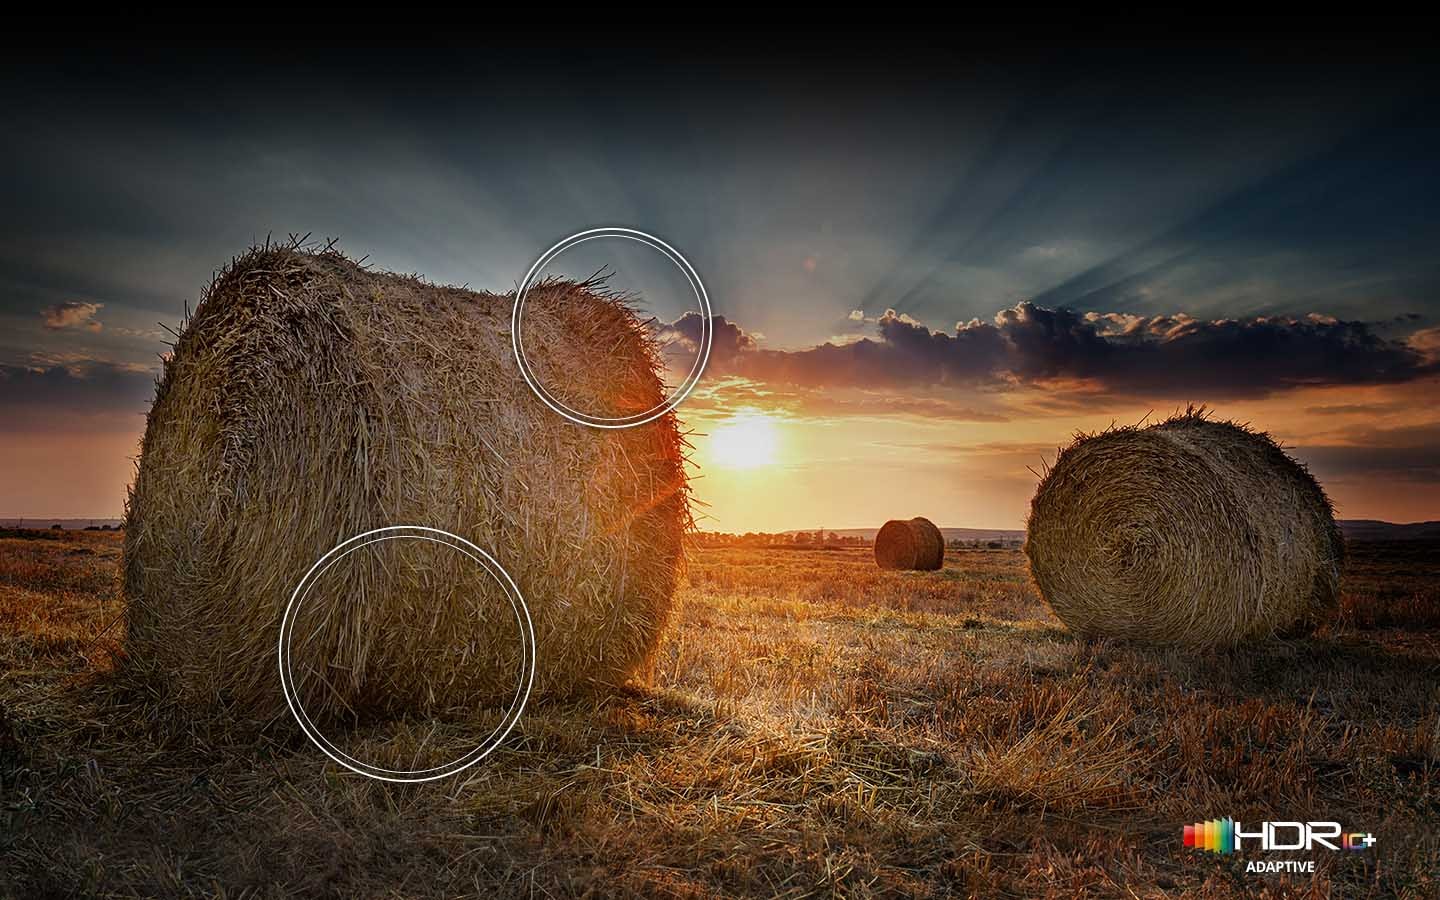 The sun is setting over a wide field with emphasis on a large hay stack. The scene after applying HDR 10+ ADAPTIVE/GAMING technology is much brighter and crisper than the SDR version.